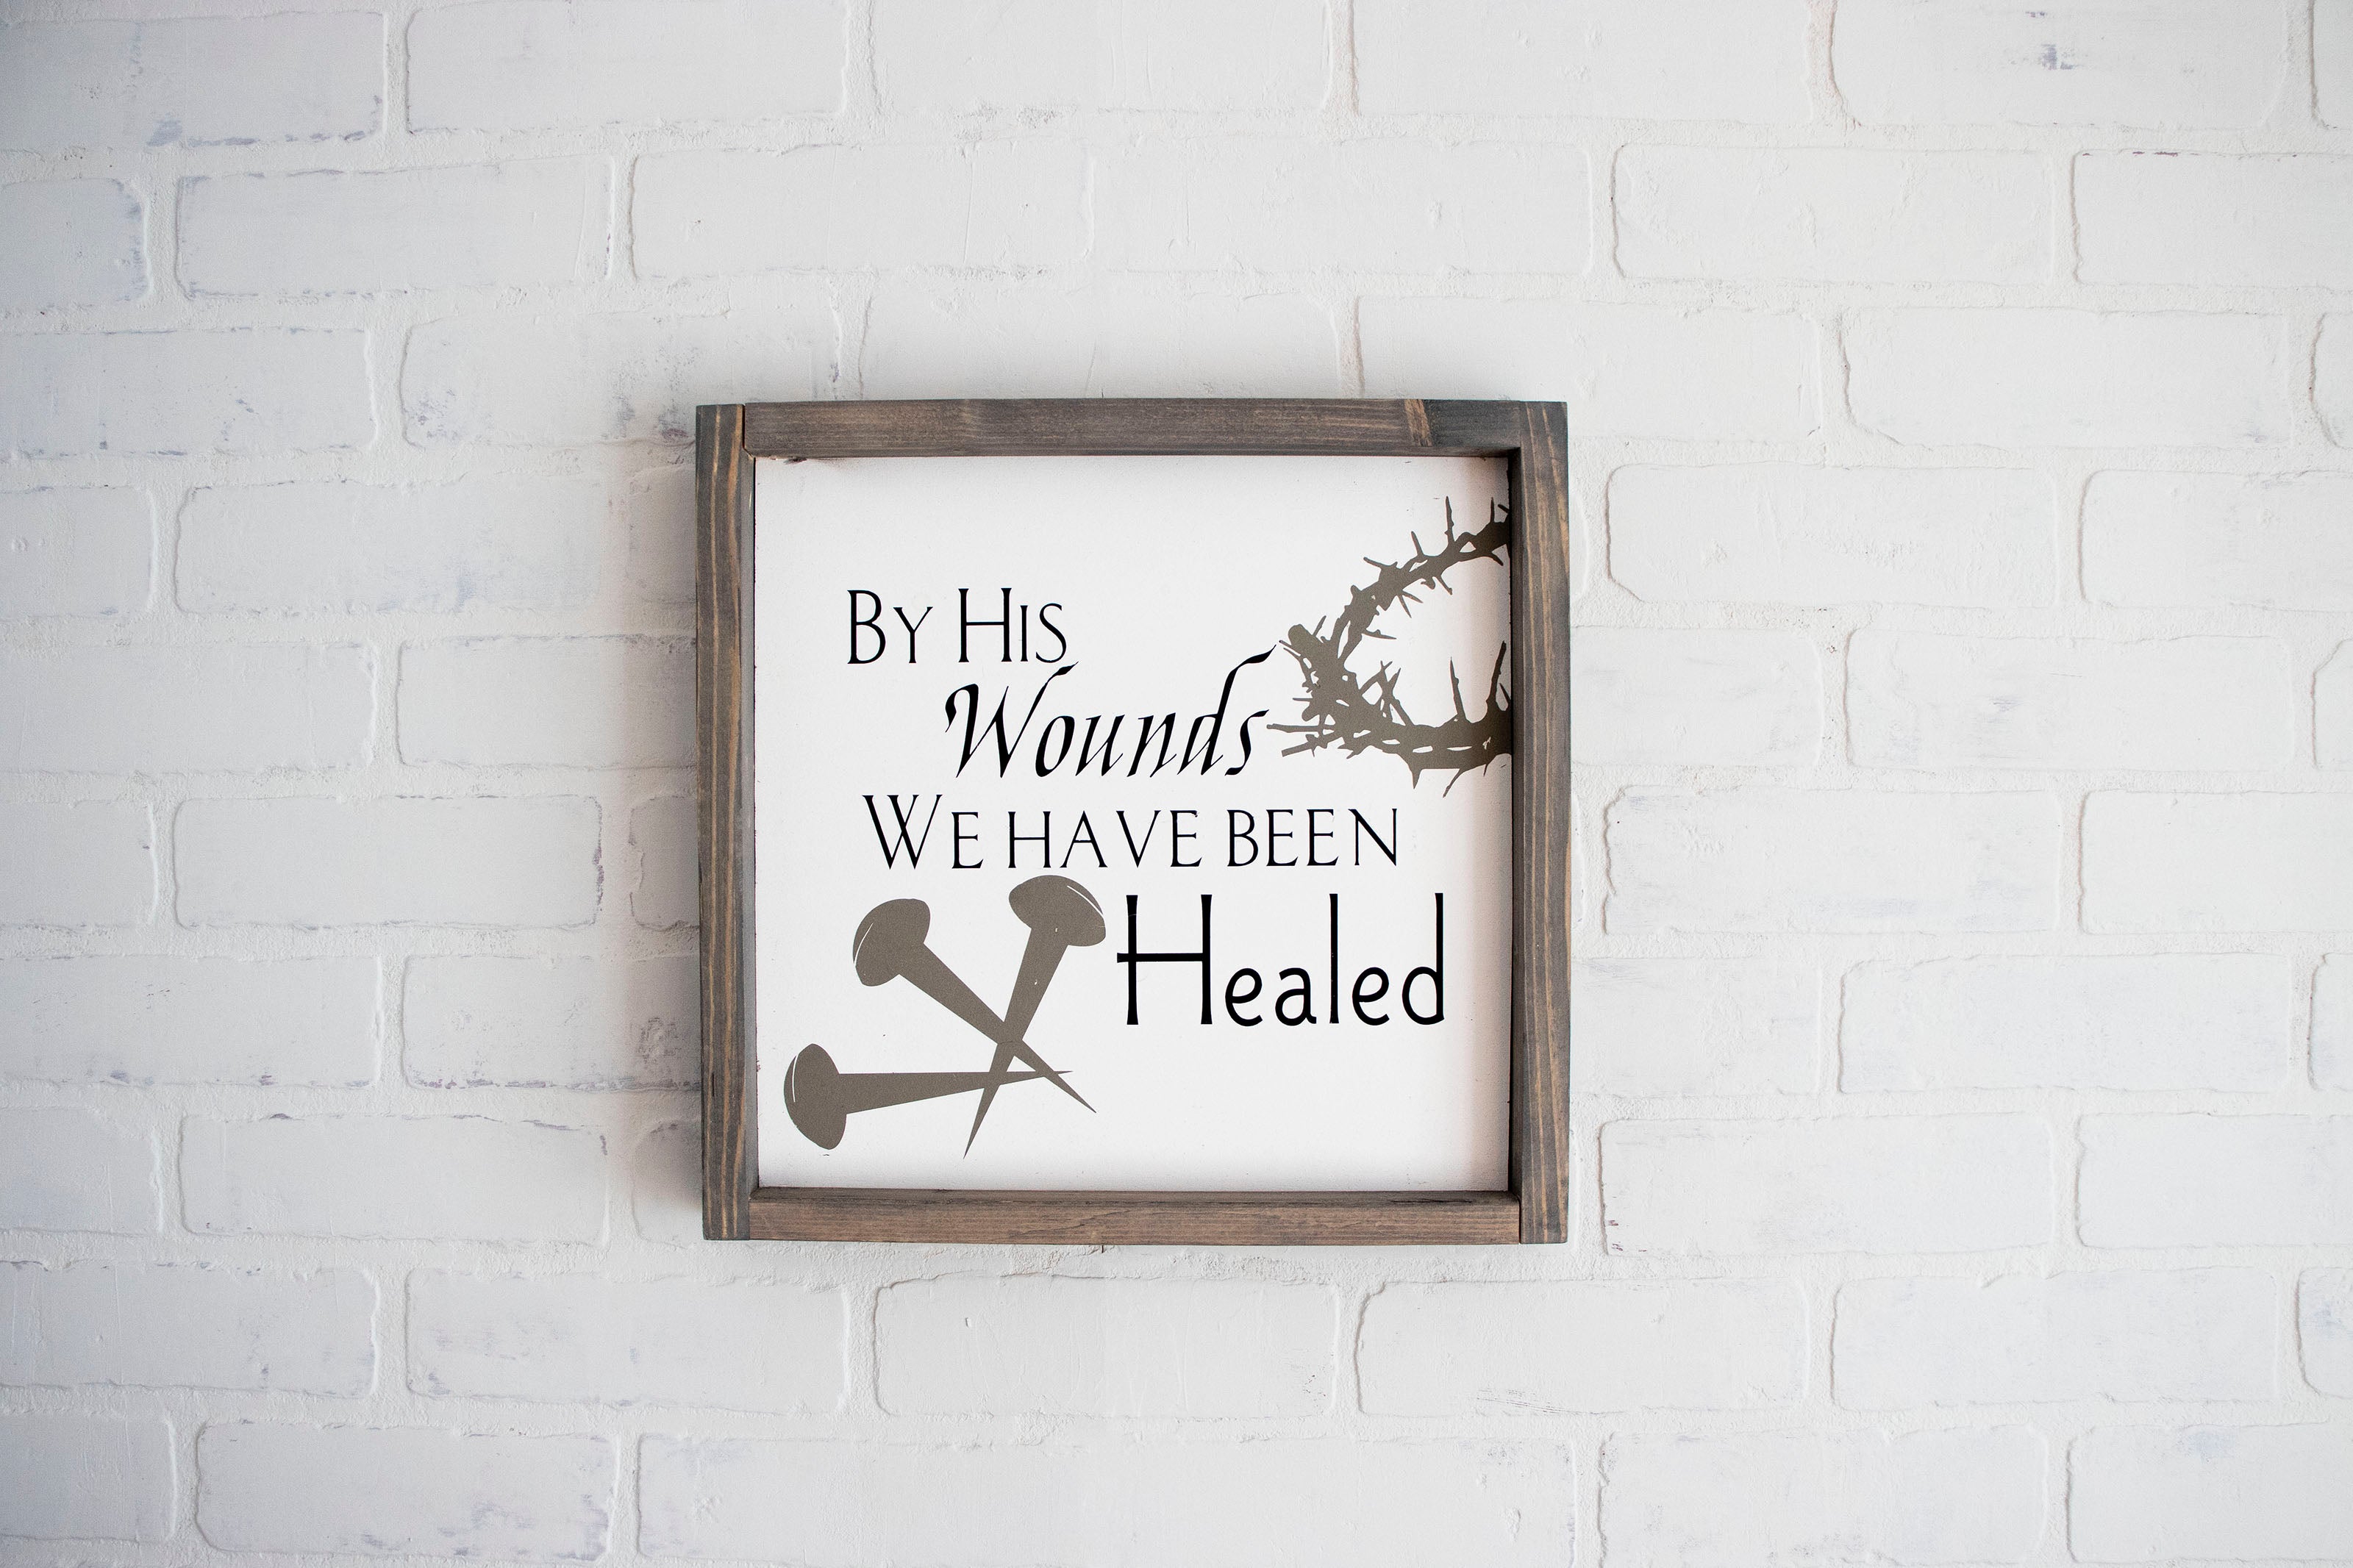 By His Wounds We Have Been Healed Wood Sign 1 Peter 2:24 Isaiah 53:5